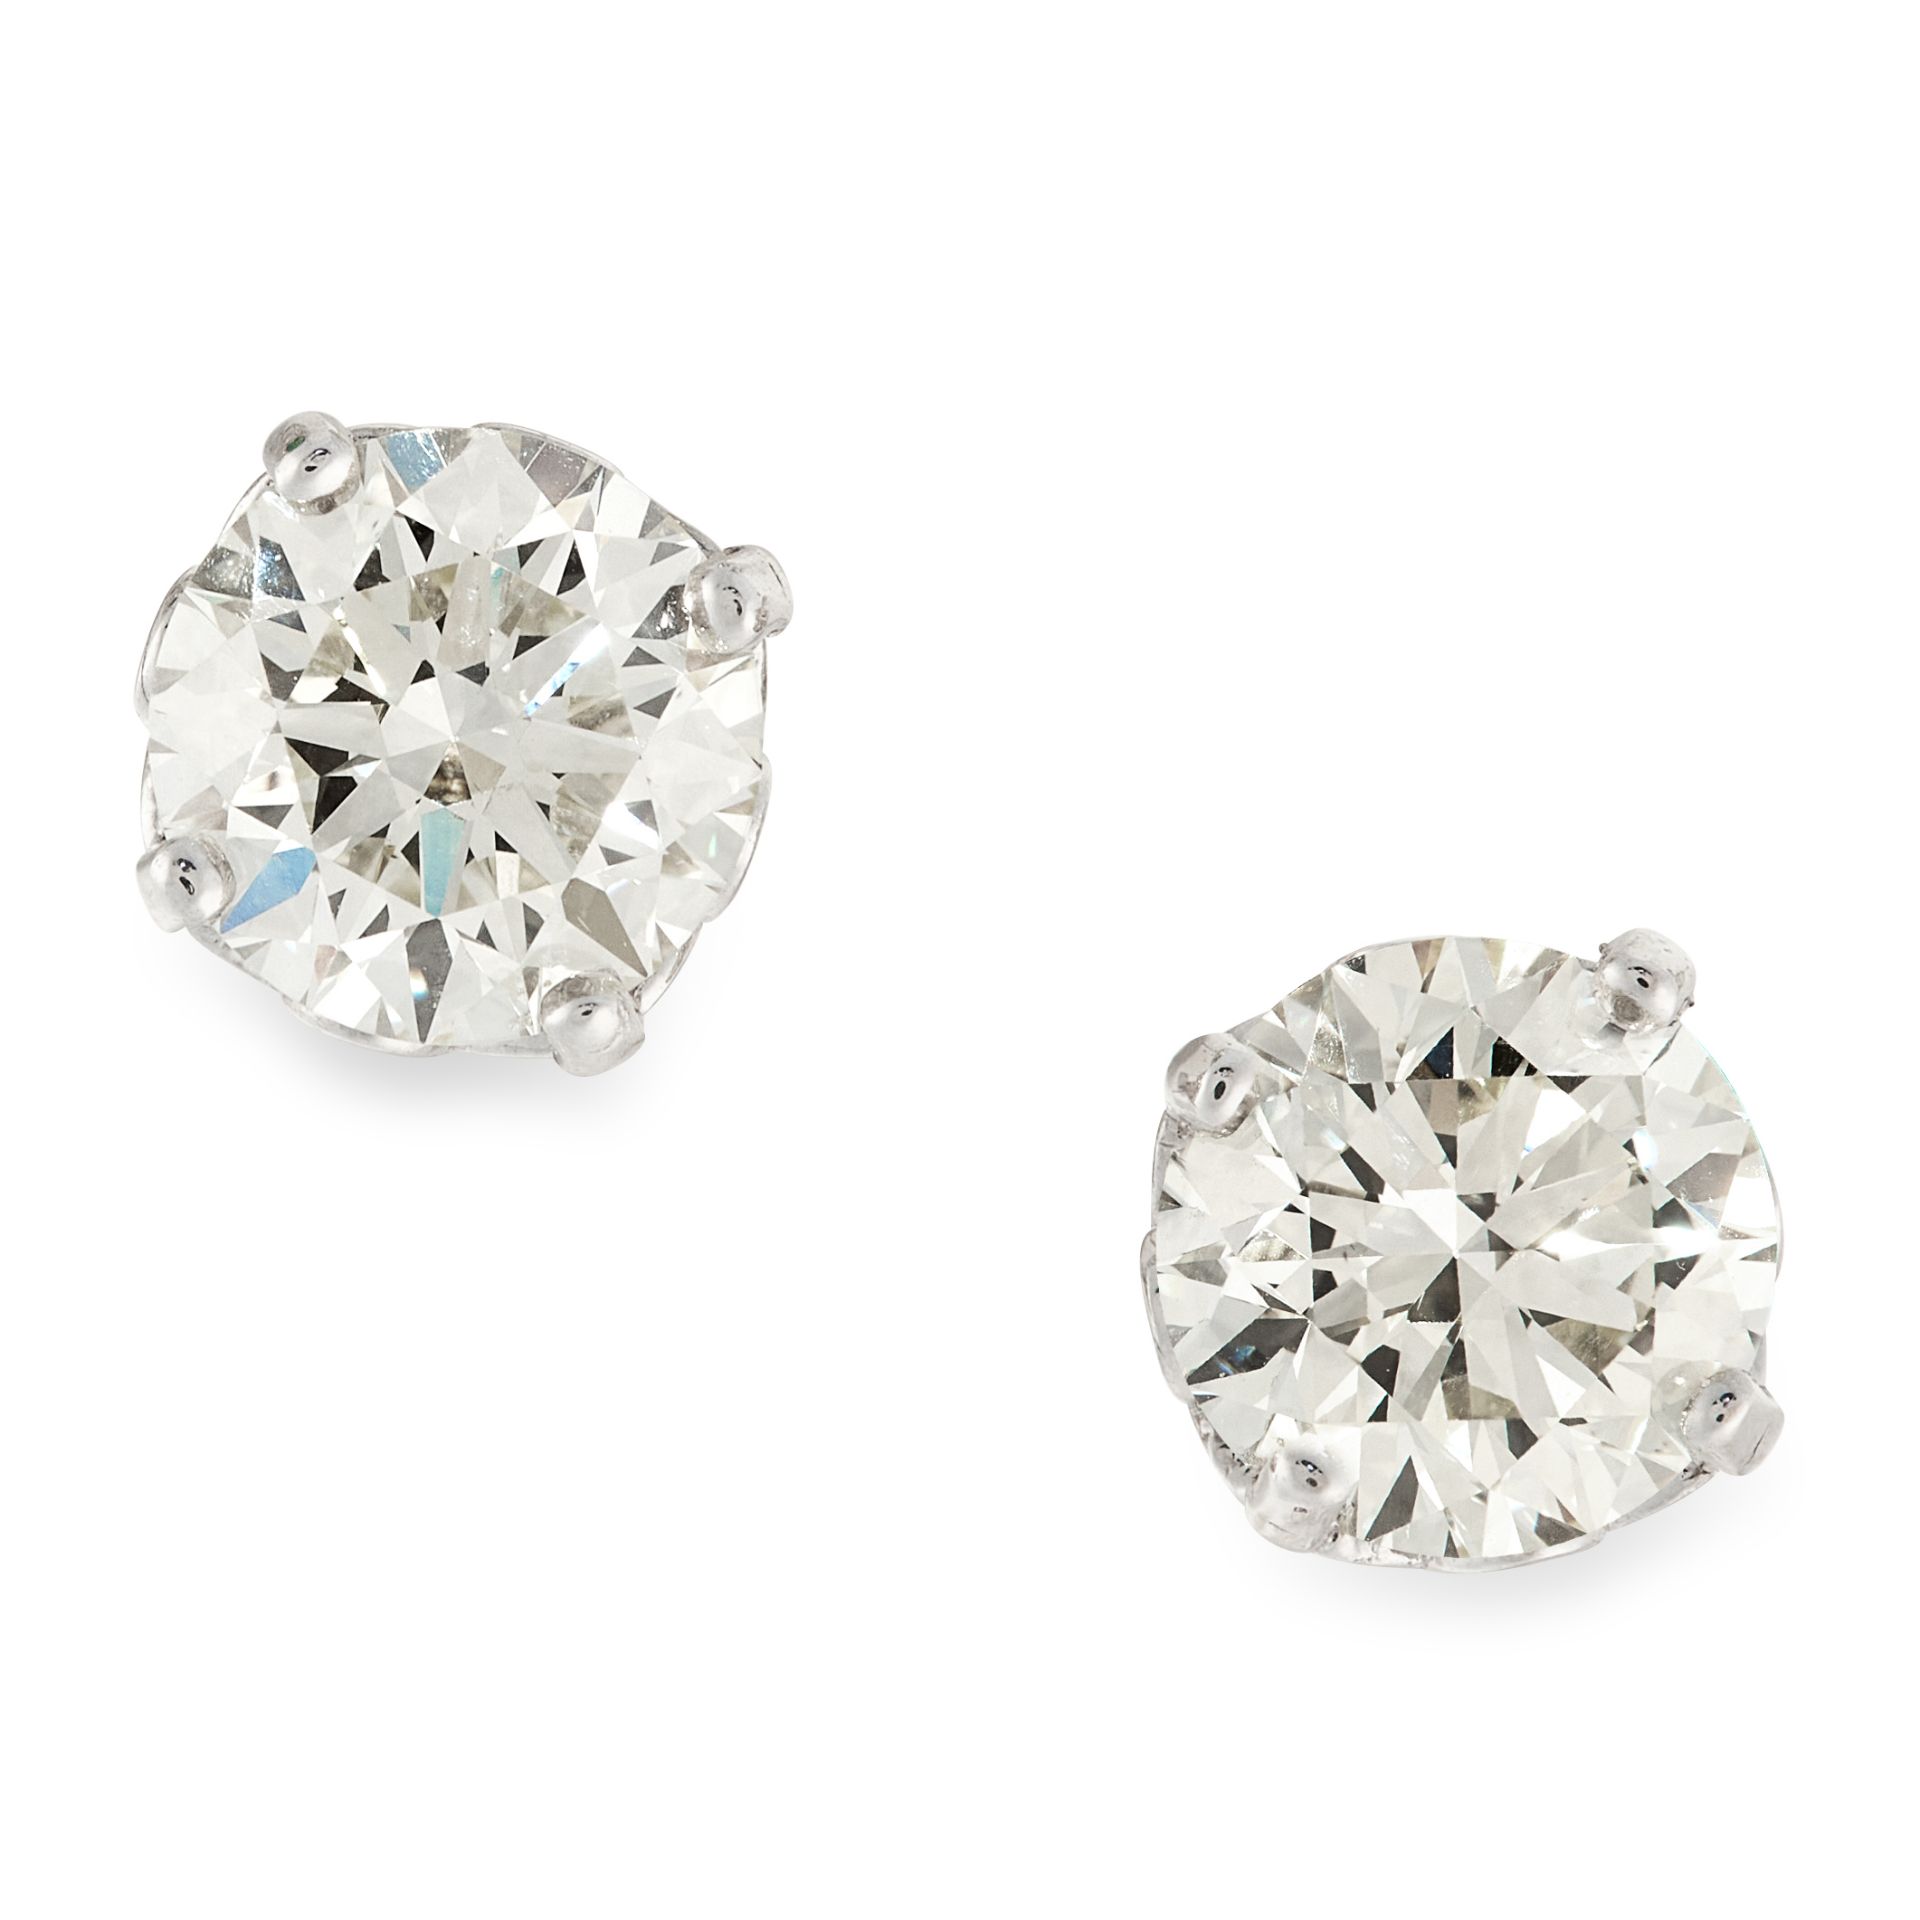 A PAIR OF 4.02 CARAT DIAMOND STUD EARRINGS in 18ct white gold, each set with a round cut diamond,